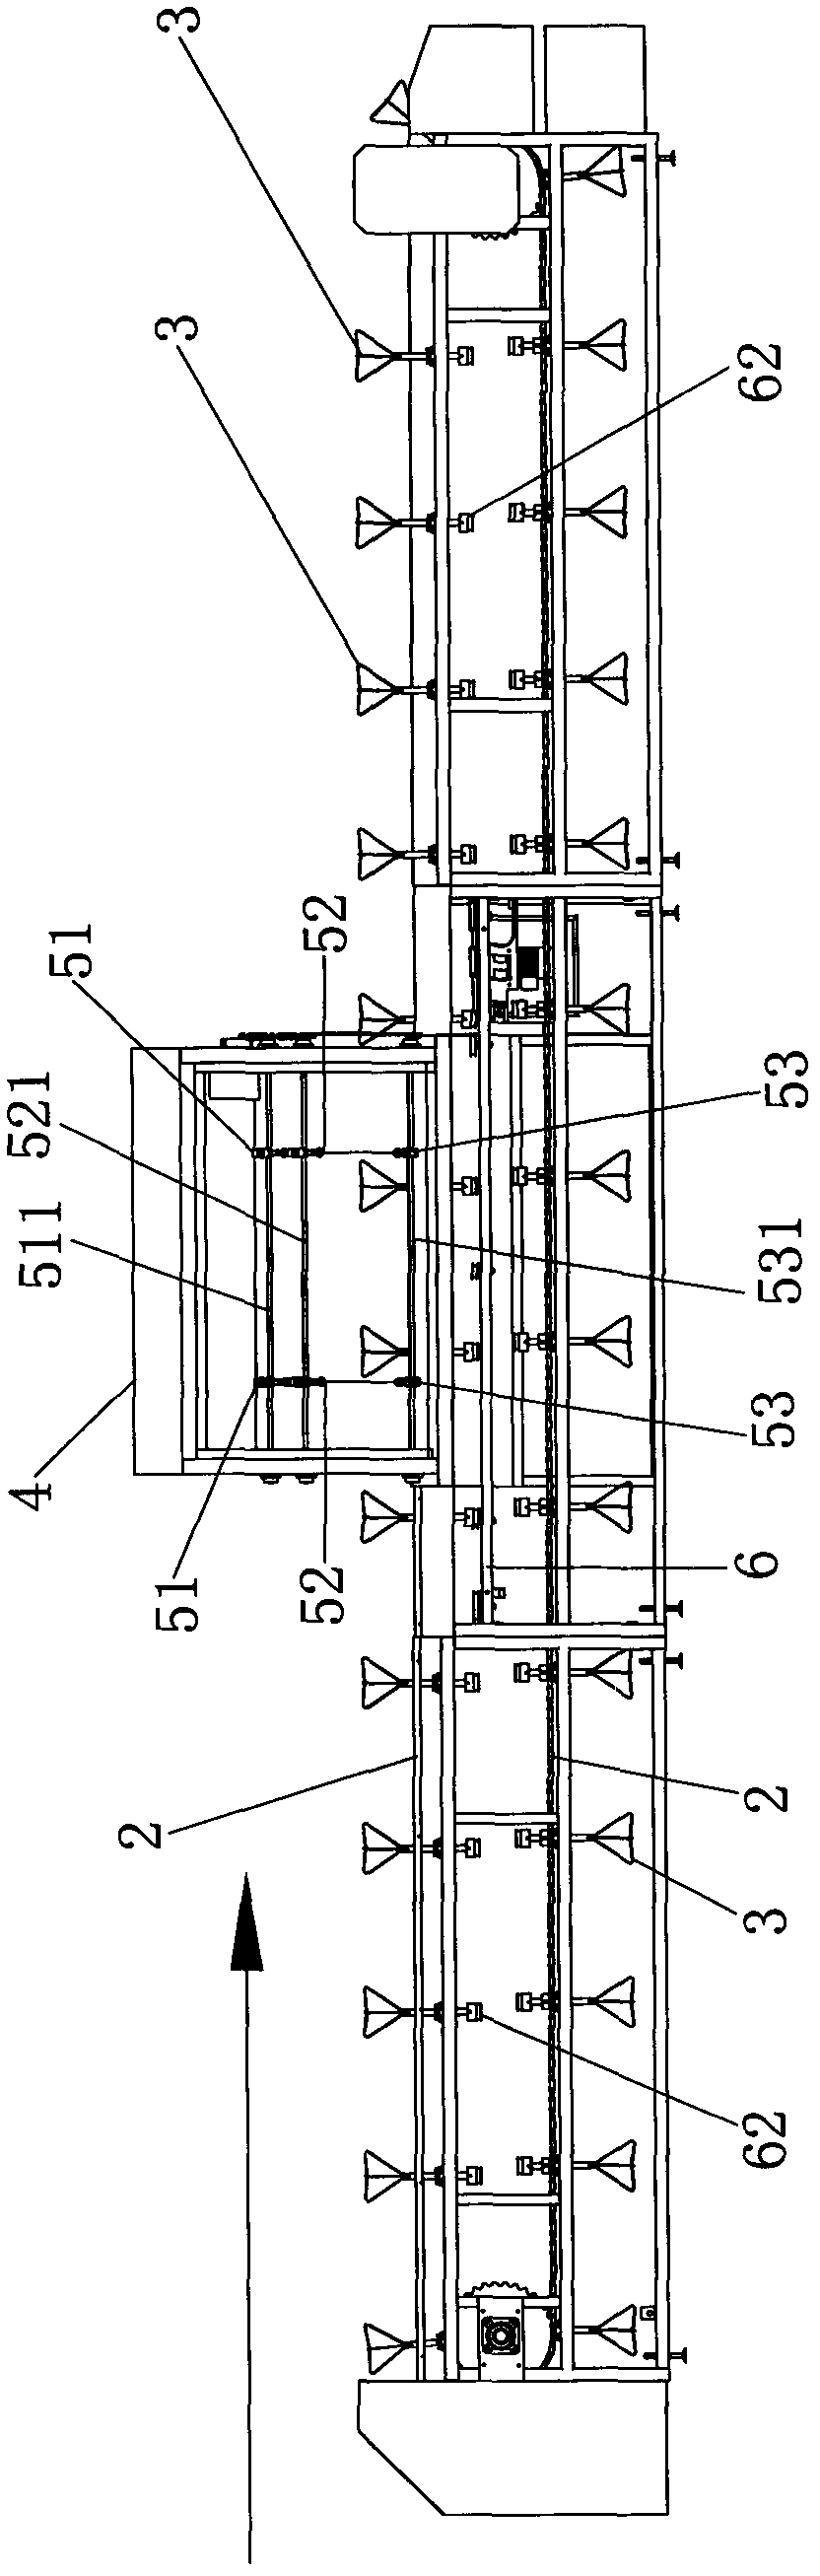 Device for automatically spraying glaze to open ceramic product